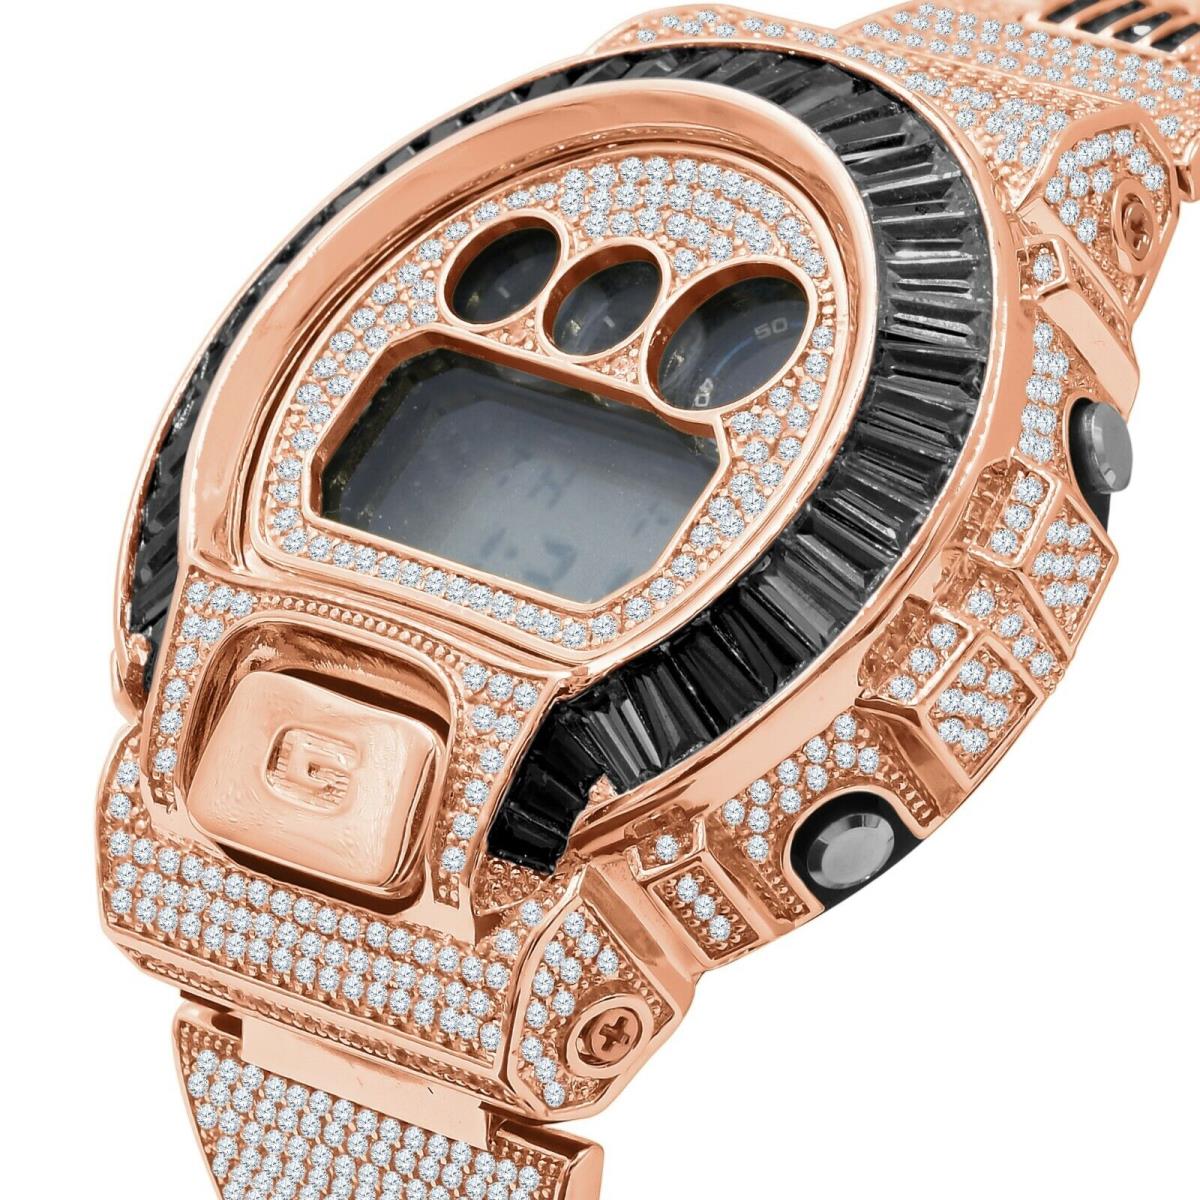 Icy Black Baguettes On Rose Gold Finish Casio G-shock DW-6900 Watch